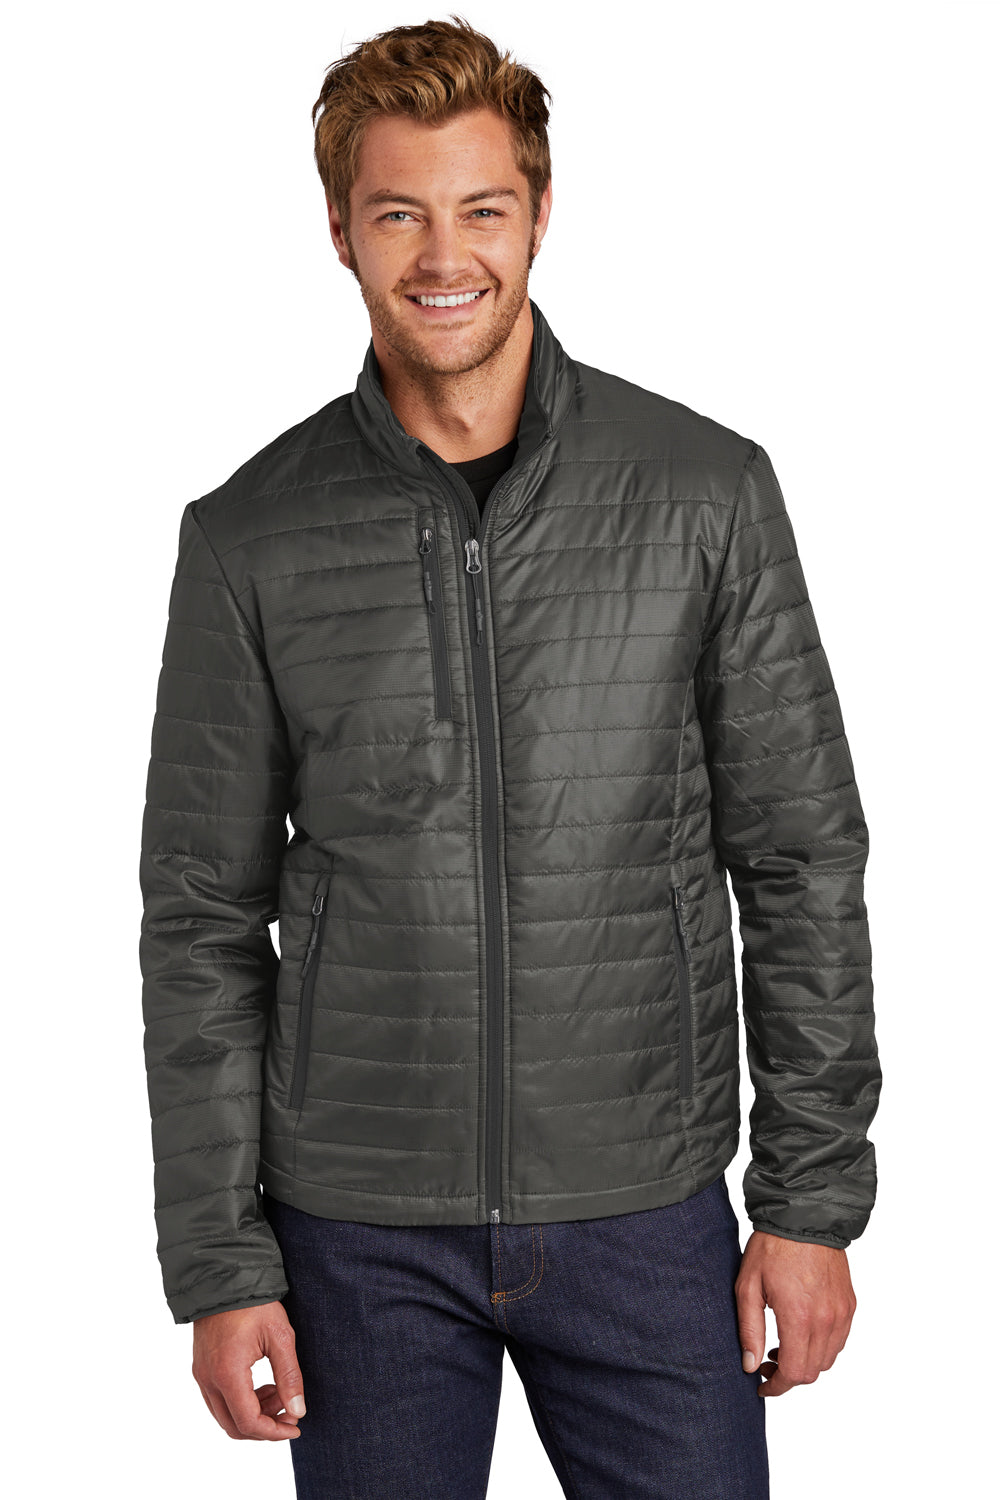 Port Authority Mens Packable Puffy Full Zip Jacket Sterling Grey/Graphite Grey Front